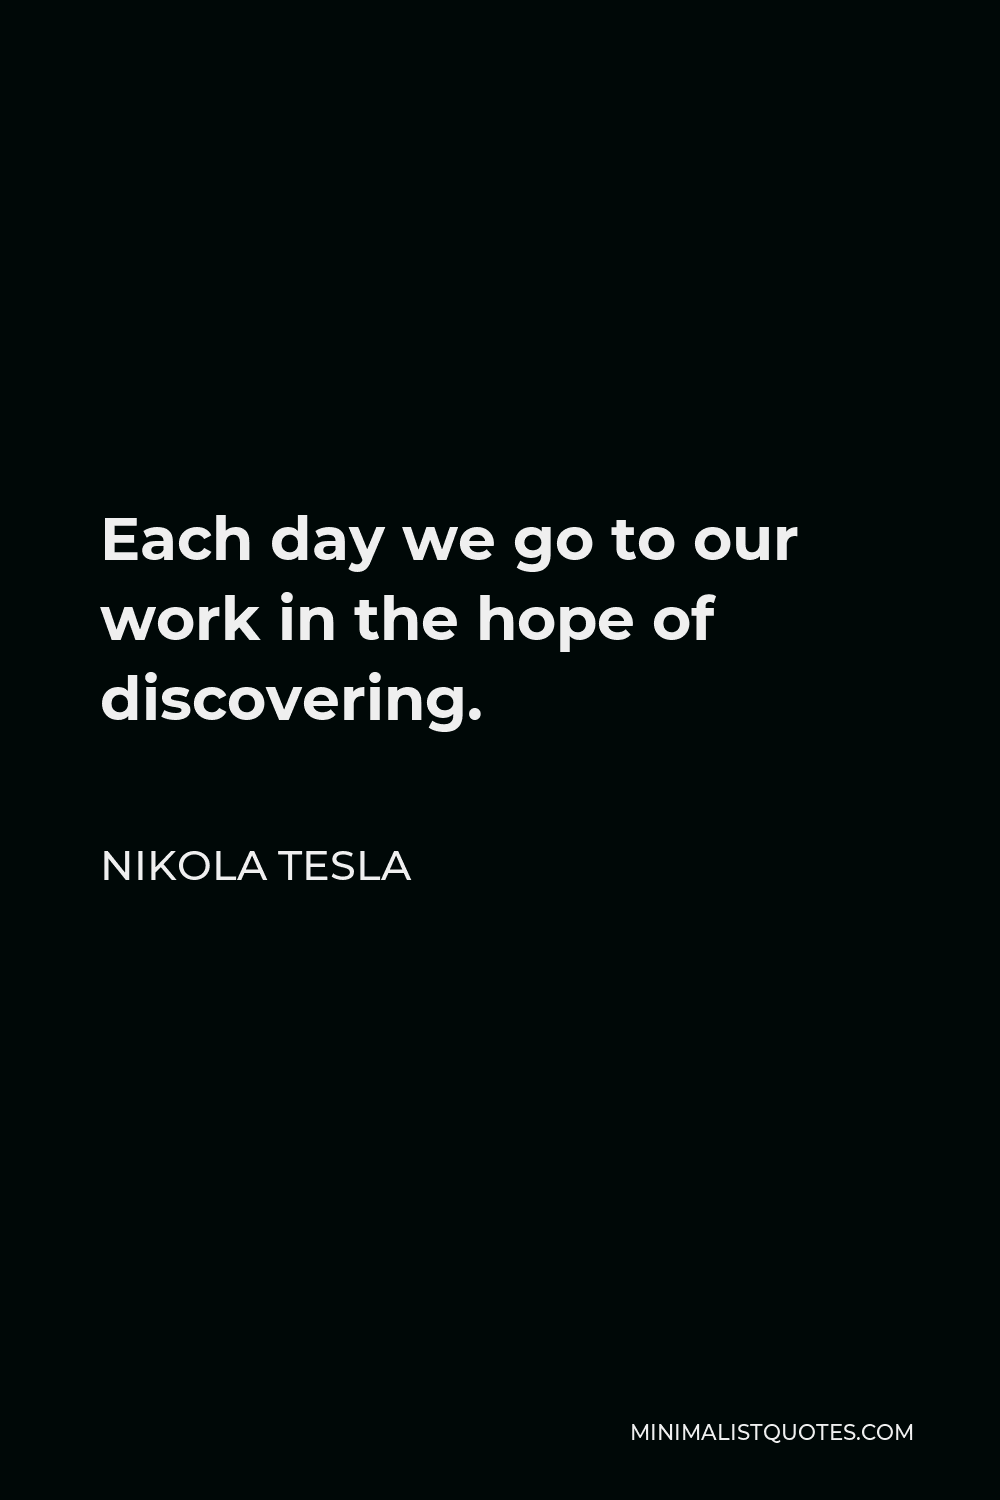 Nikola Tesla Quote - Each day we go to our work in the hope of discovering.